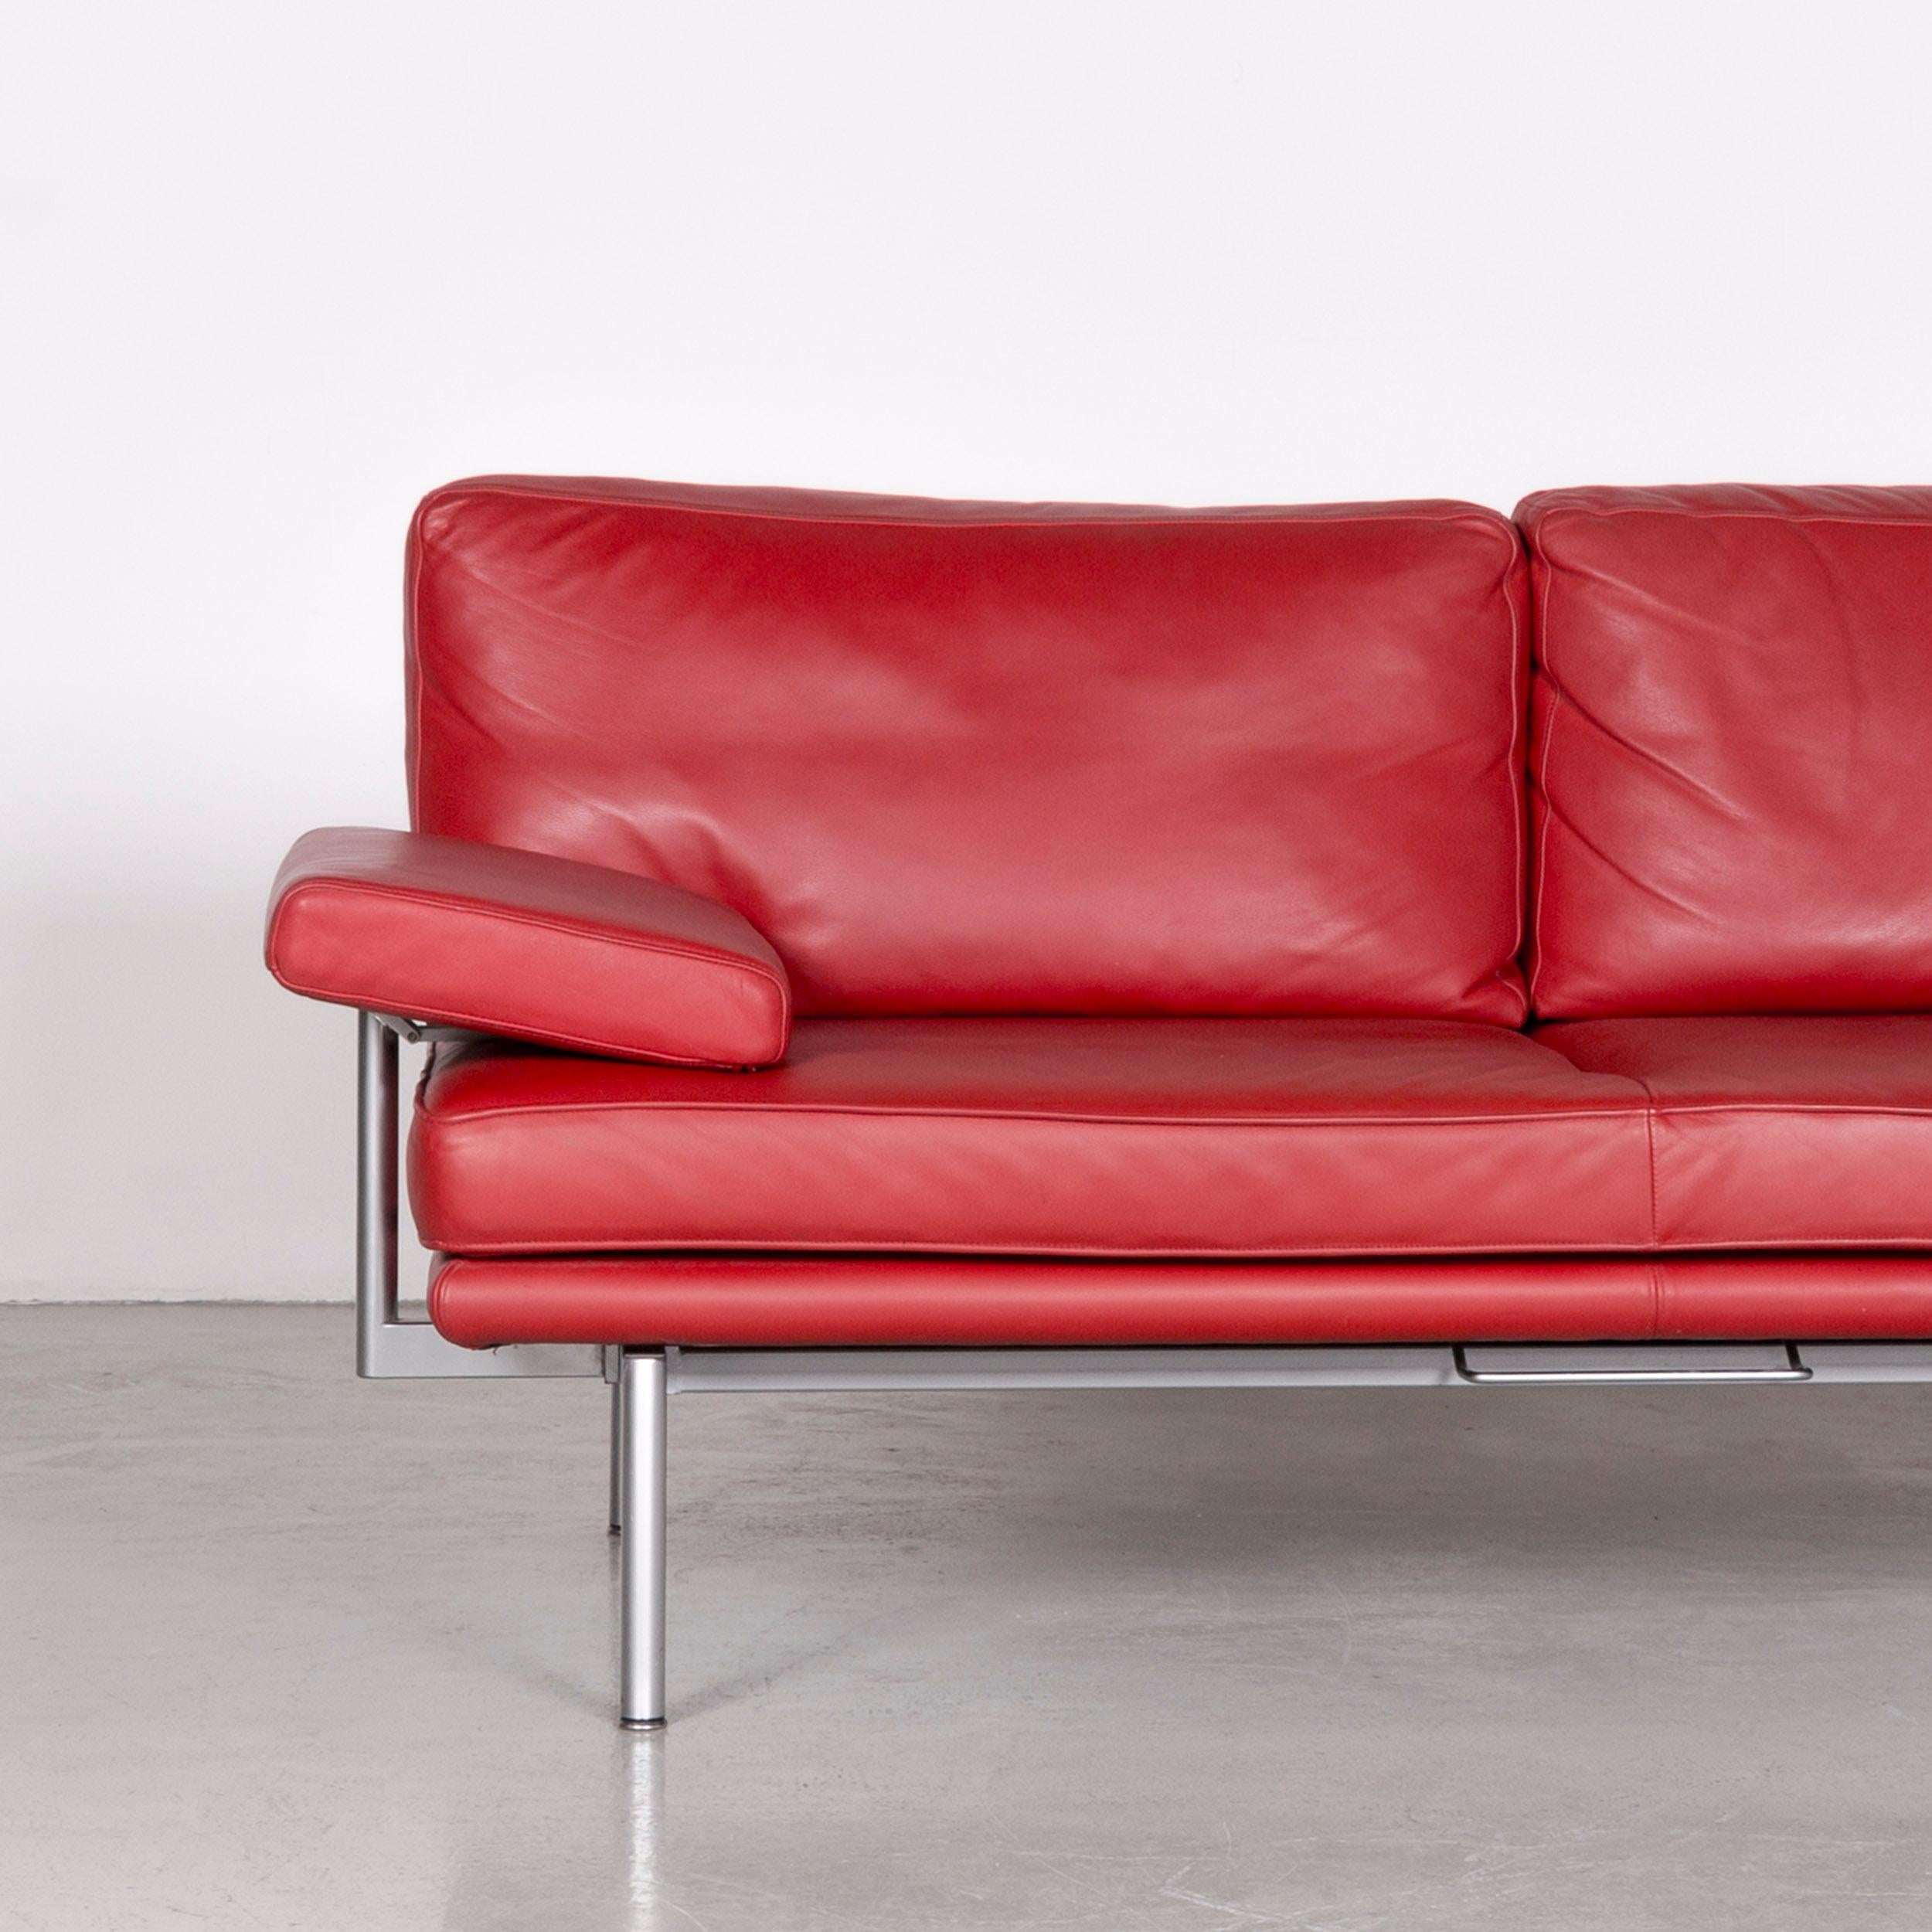 German Walter Knoll Living Platform Designer Leather Couch Red by EOOS Design For Sale